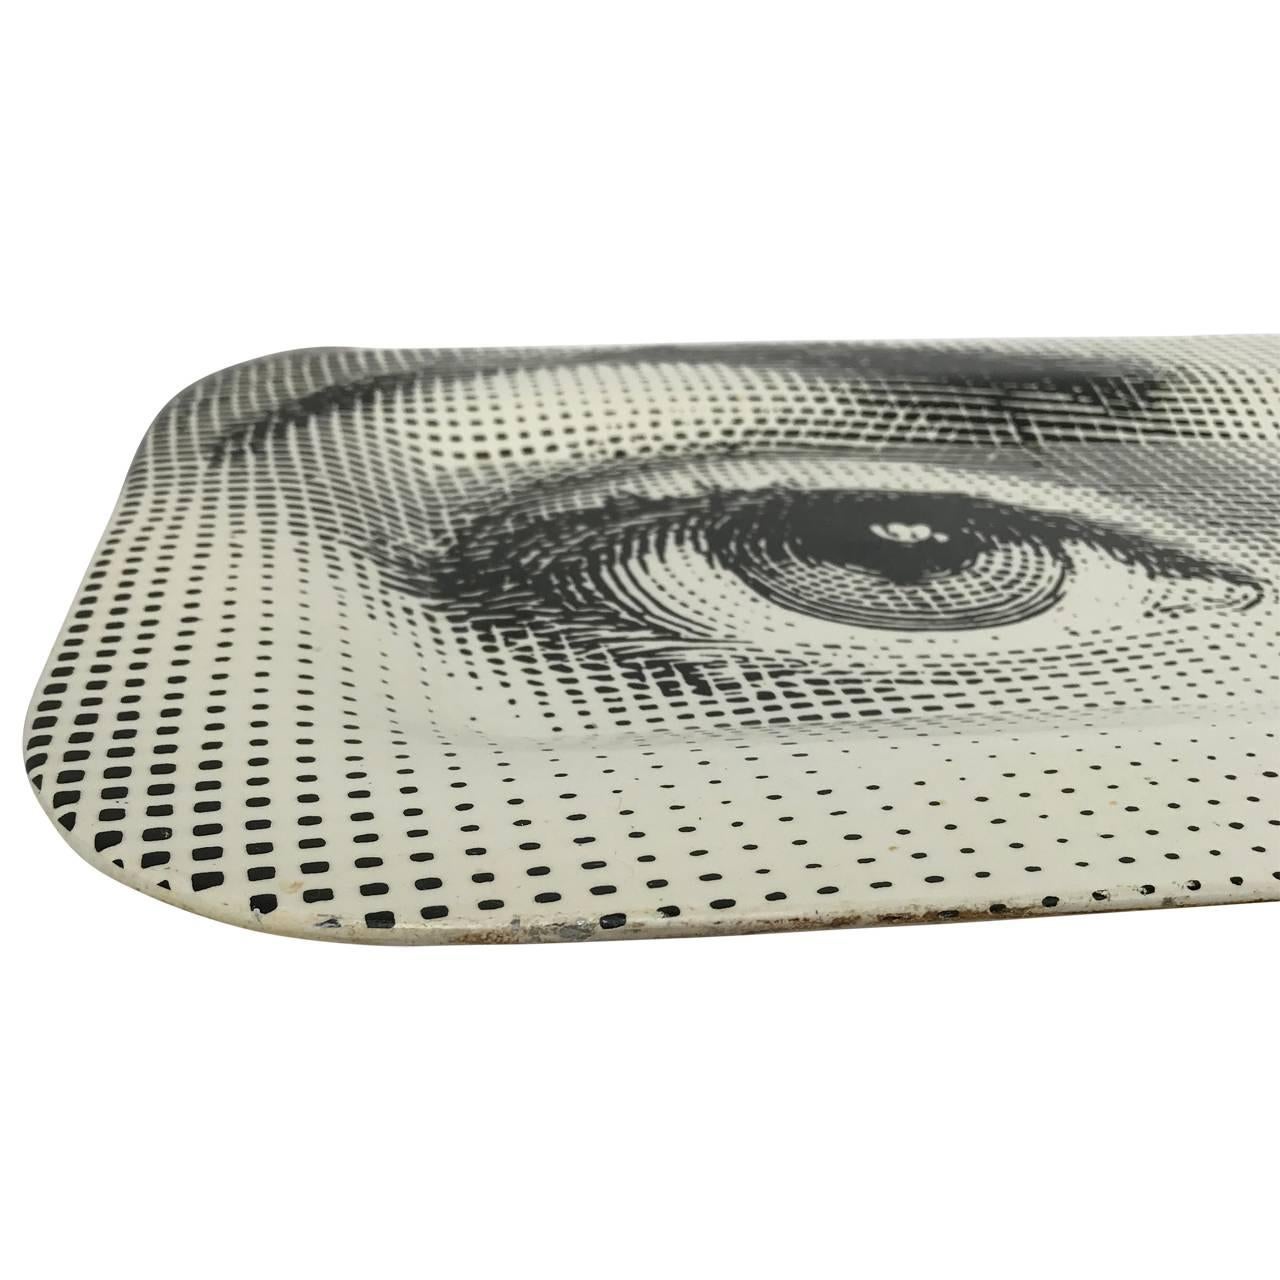 Vintage iconic metal Piero Fornasetti tray, with the original label.
Part of the Tema & Variazioni series, where Fornasetti used the face of the 19th century opera singer Lina Cavaslieri.
This tray and two other of my Fornasetti listings, has